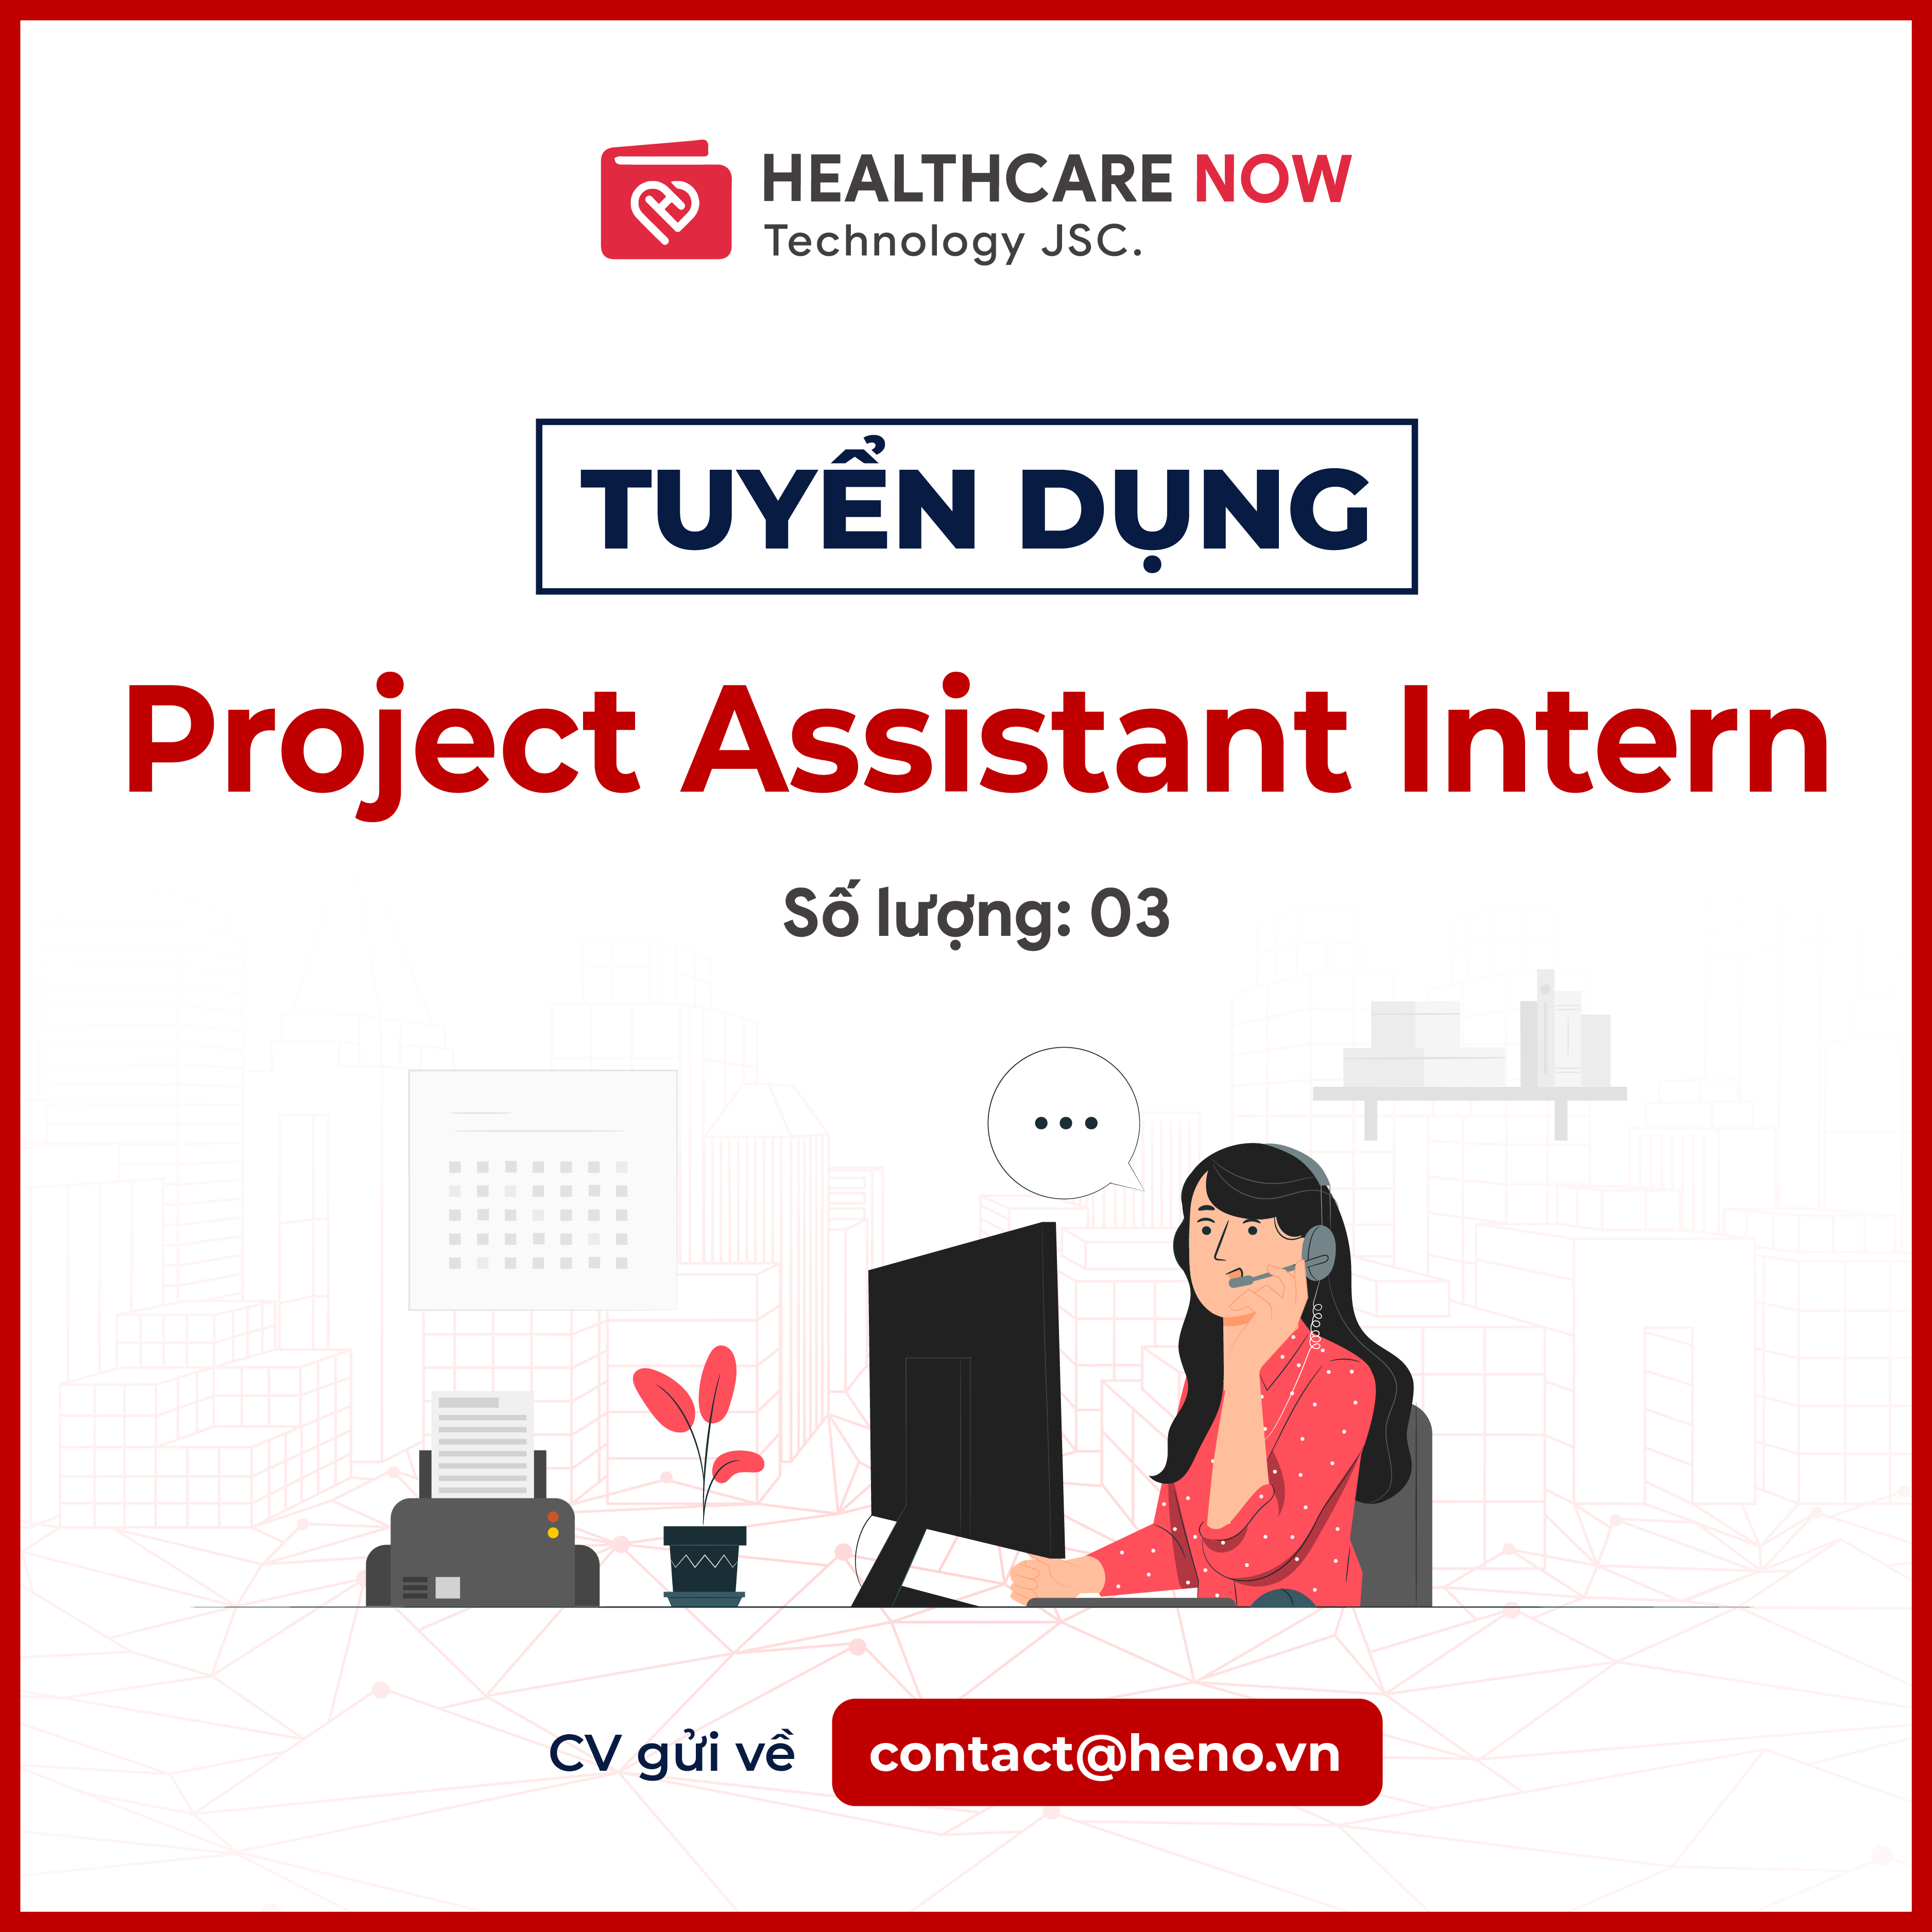 HENO_Tuyển dụng Project Assistant Intern